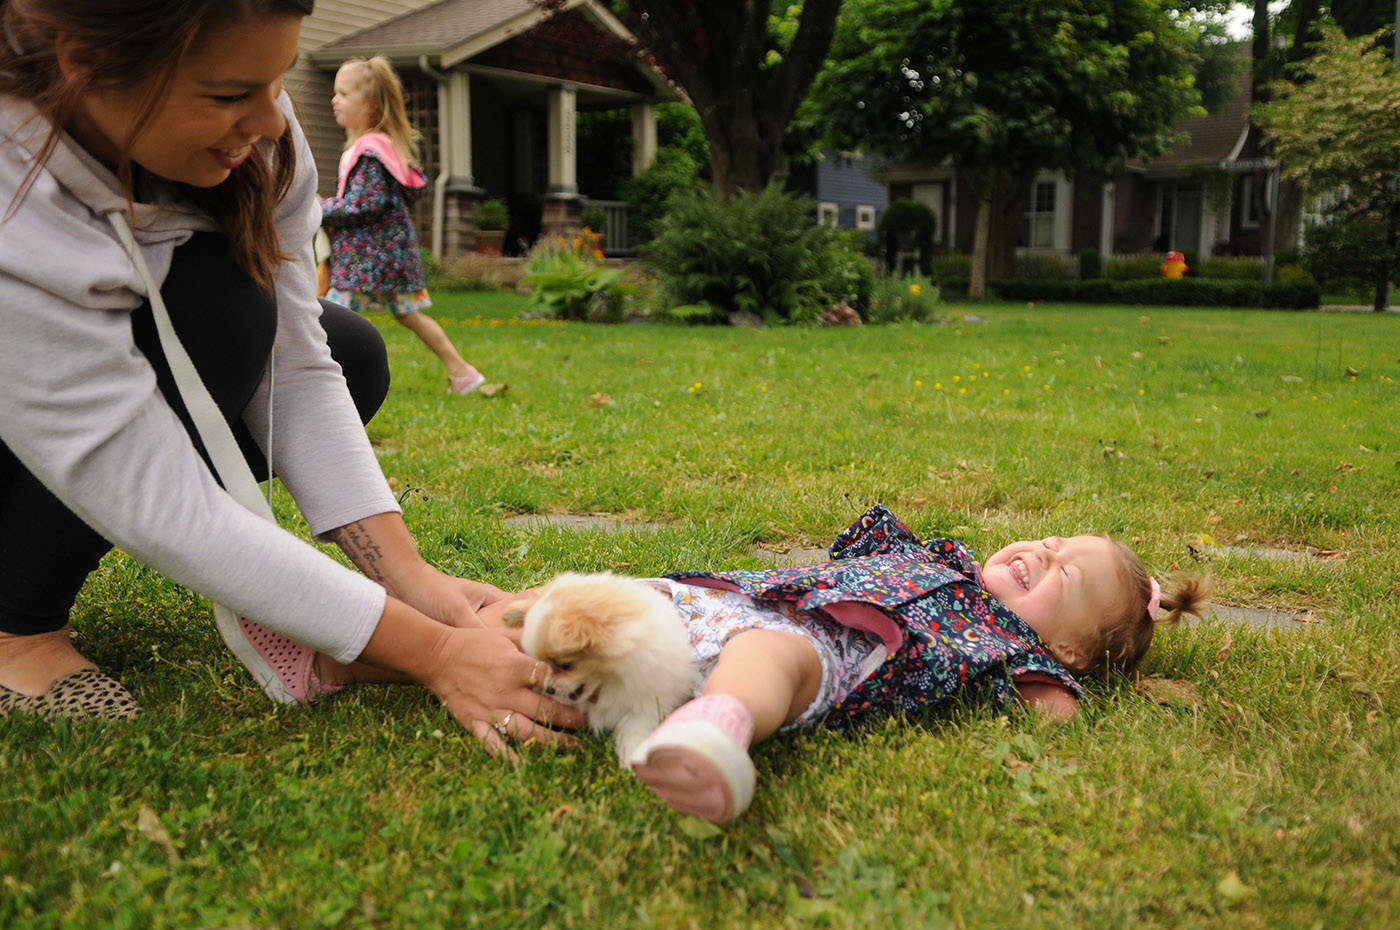 Two-year-old Ivy McLeod falls over from laughing so hard while playing with Lucky the puppy outside their Chilliwack home on Thursday, June 10, 2021. (Jenna Hauck/ Chilliwack Progress)